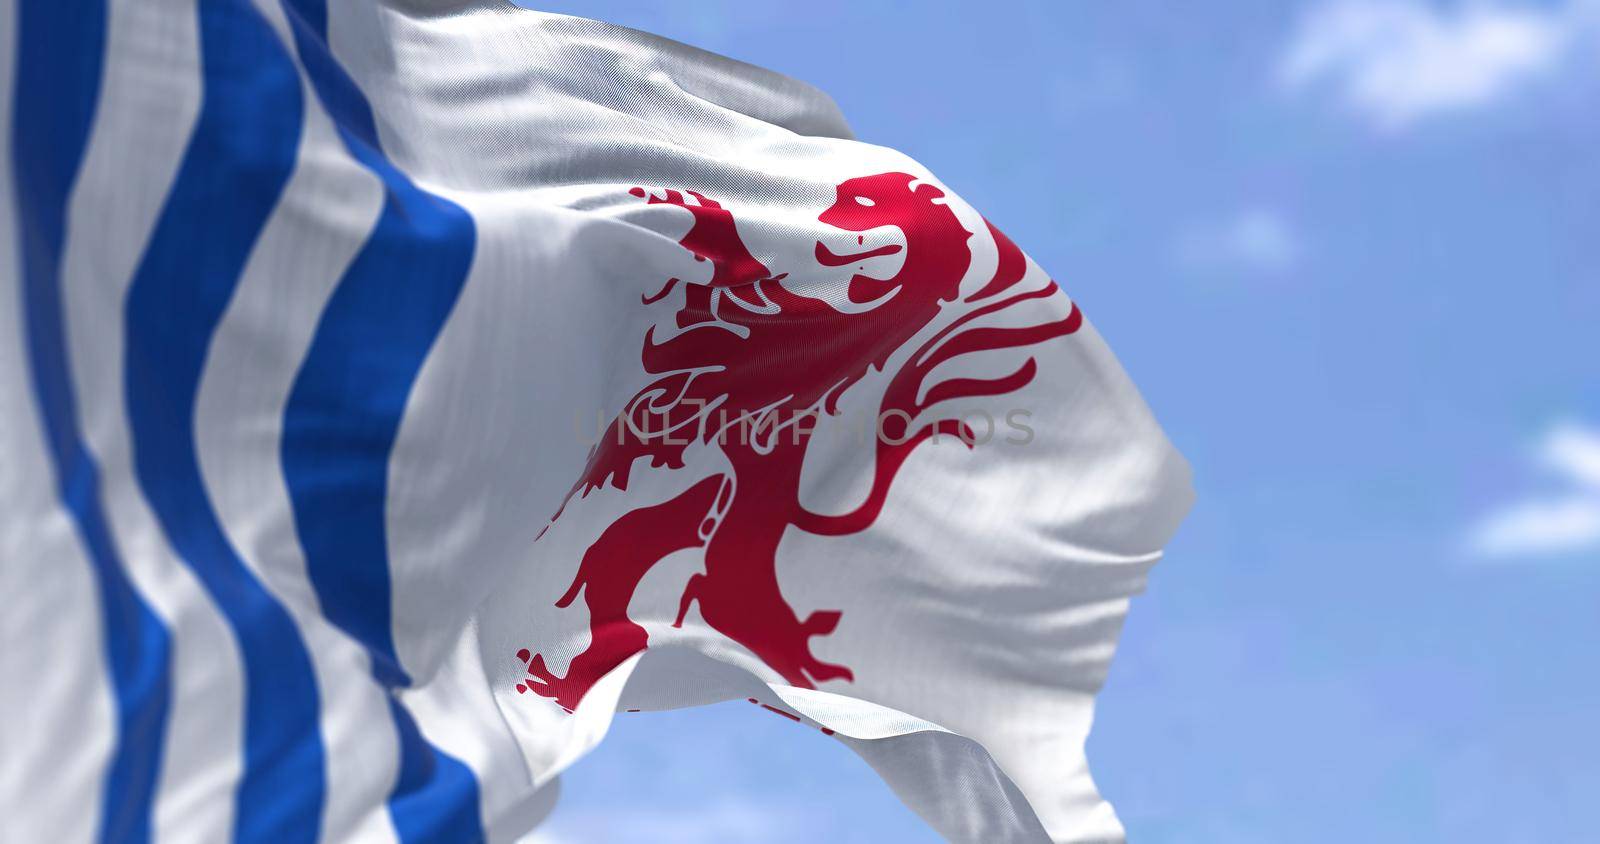 The flag of Nouvelle-Aquitaine waving in the wind on a clear day by rarrarorro